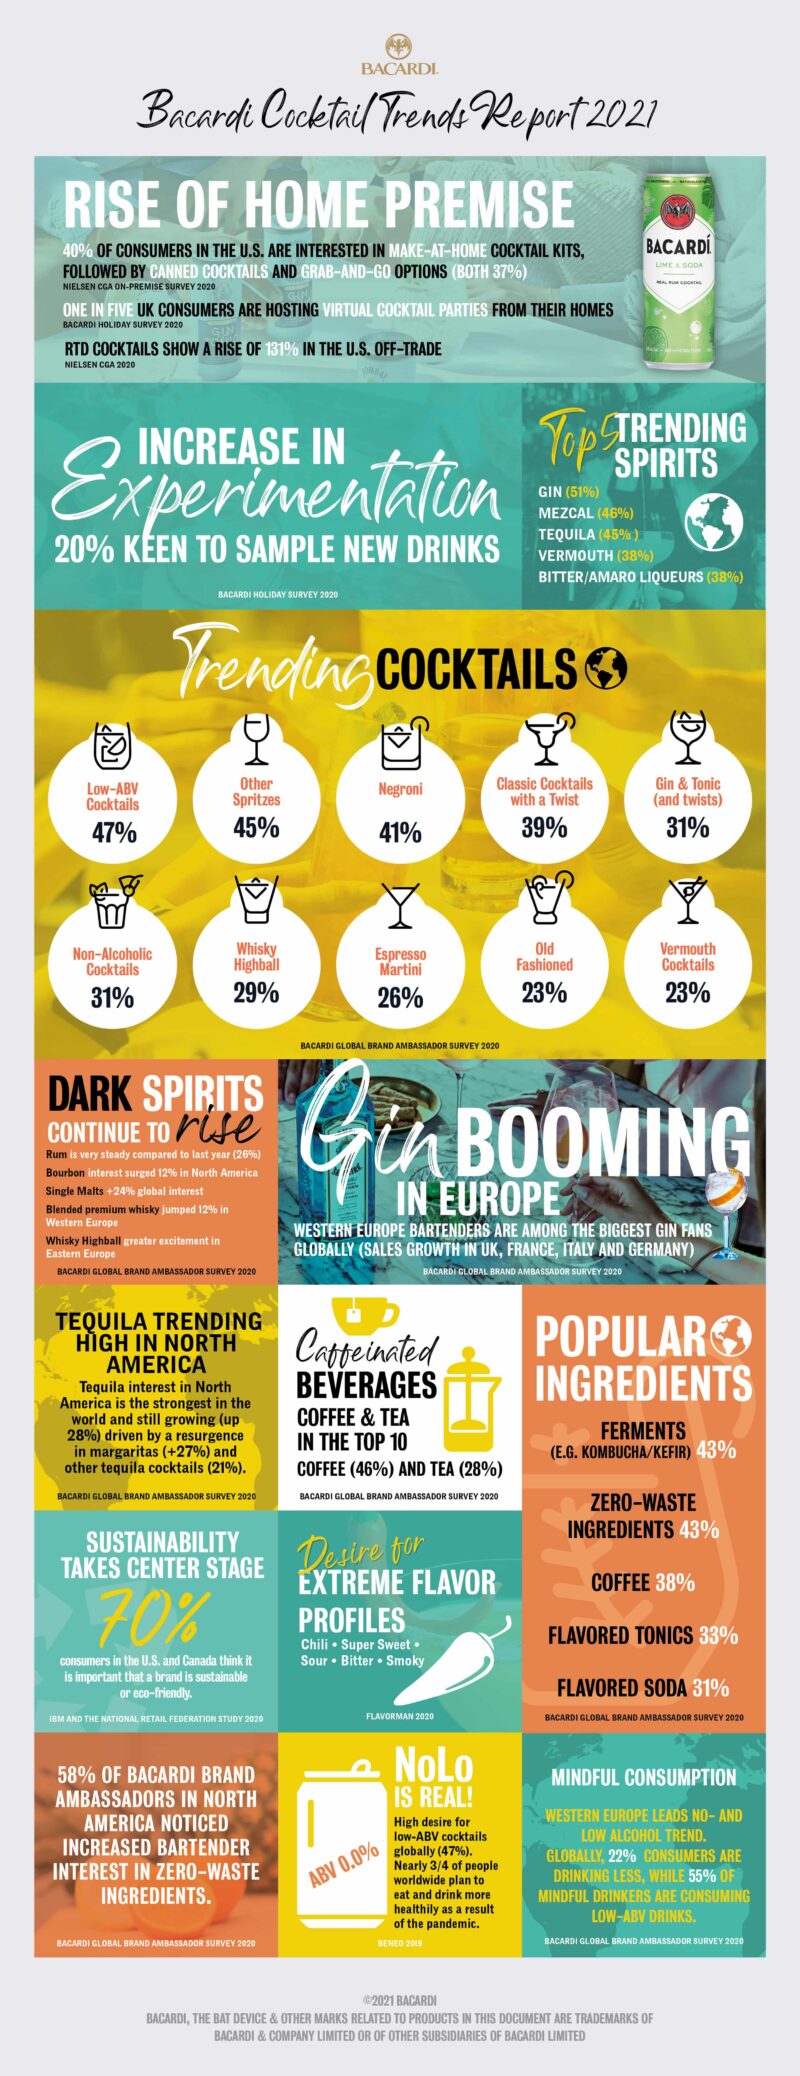 Bacardi 2021 Cocktail Trends Report_Infographic